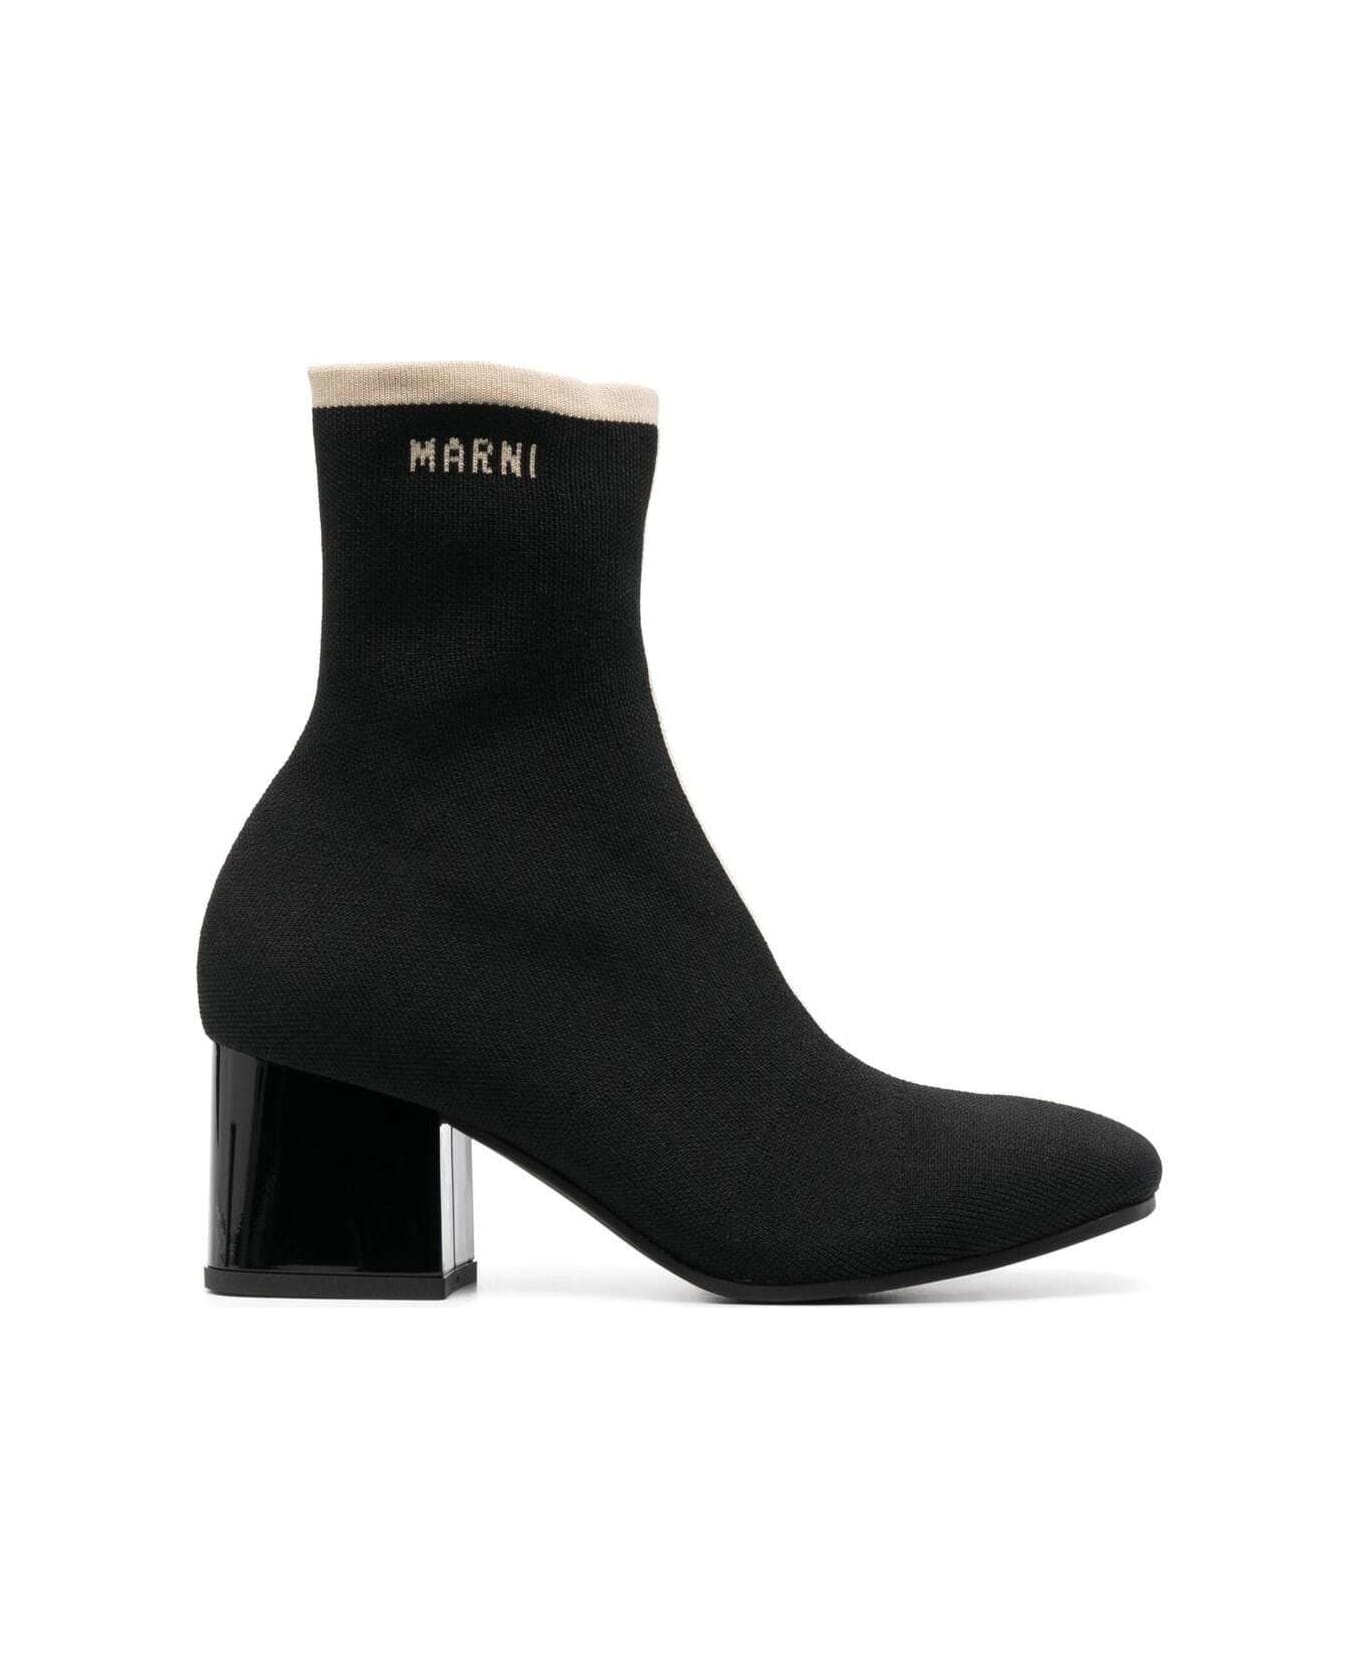 Marni Black Ankle Boot In Leather With Medium And Wide Heel Ecru-colored Details - Black